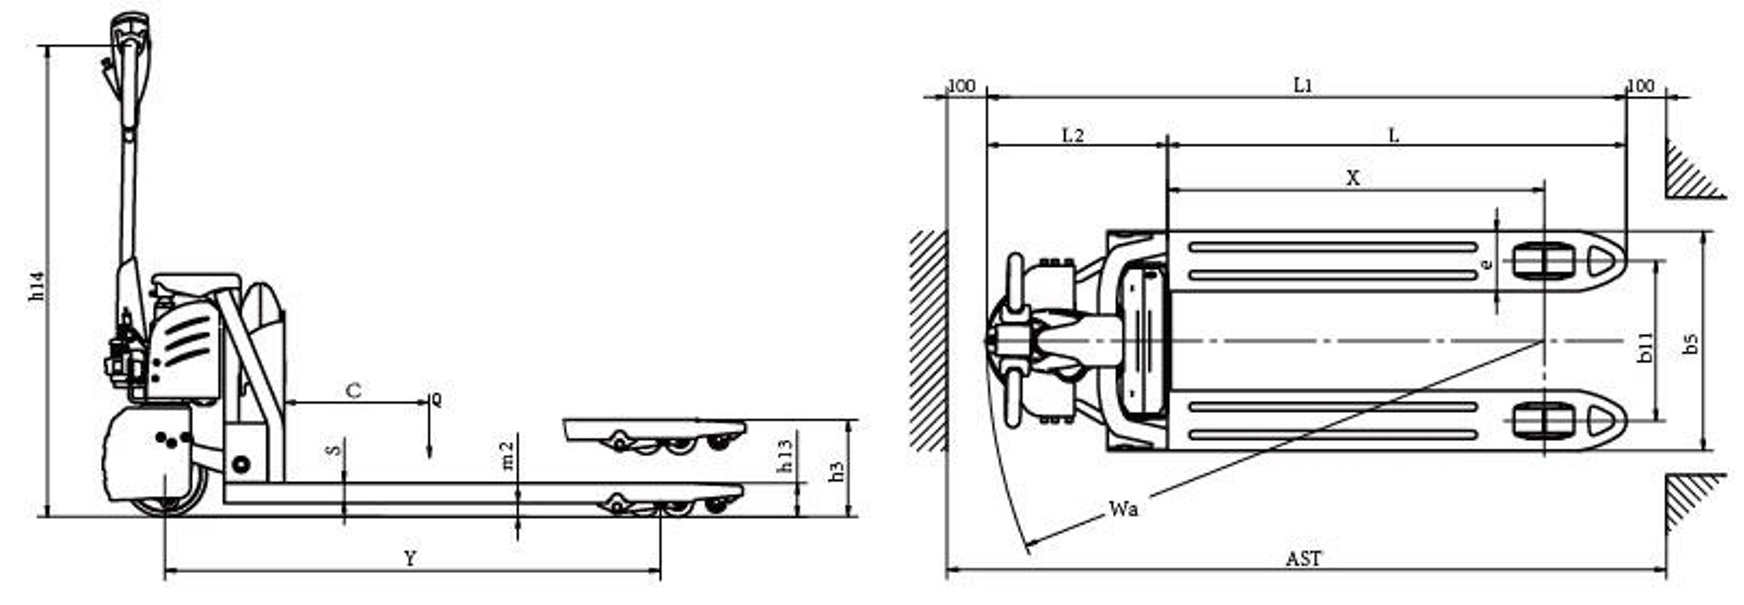 technical drawing of Lithium Battery powered Pallet Truck 1.5 ton.jpg